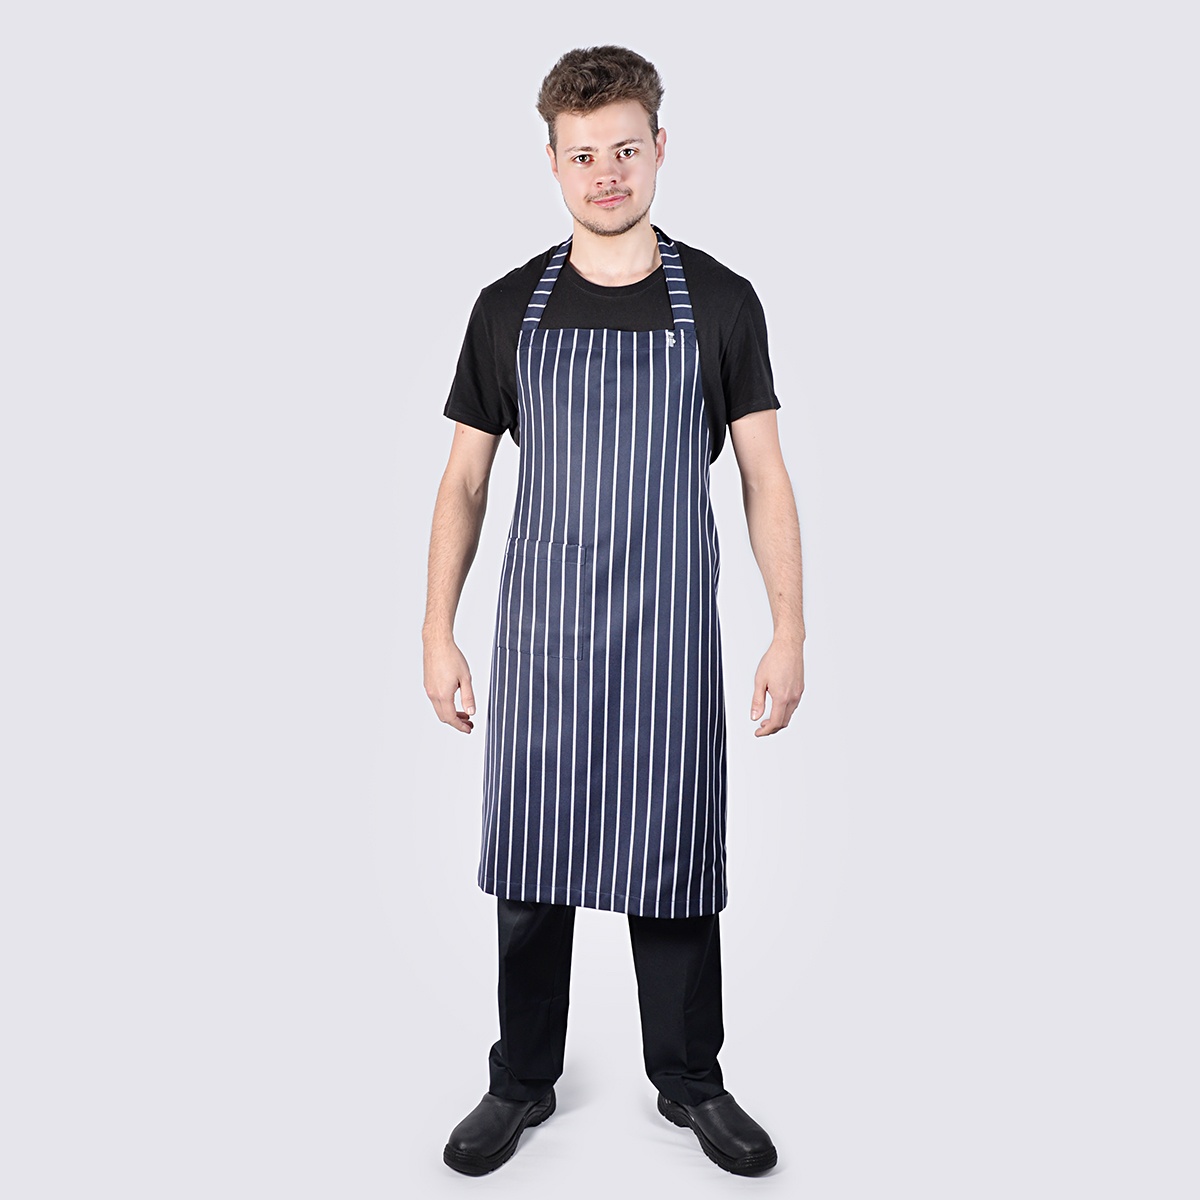 Pinstripe Bib Aprons - Navy and White with Pocket